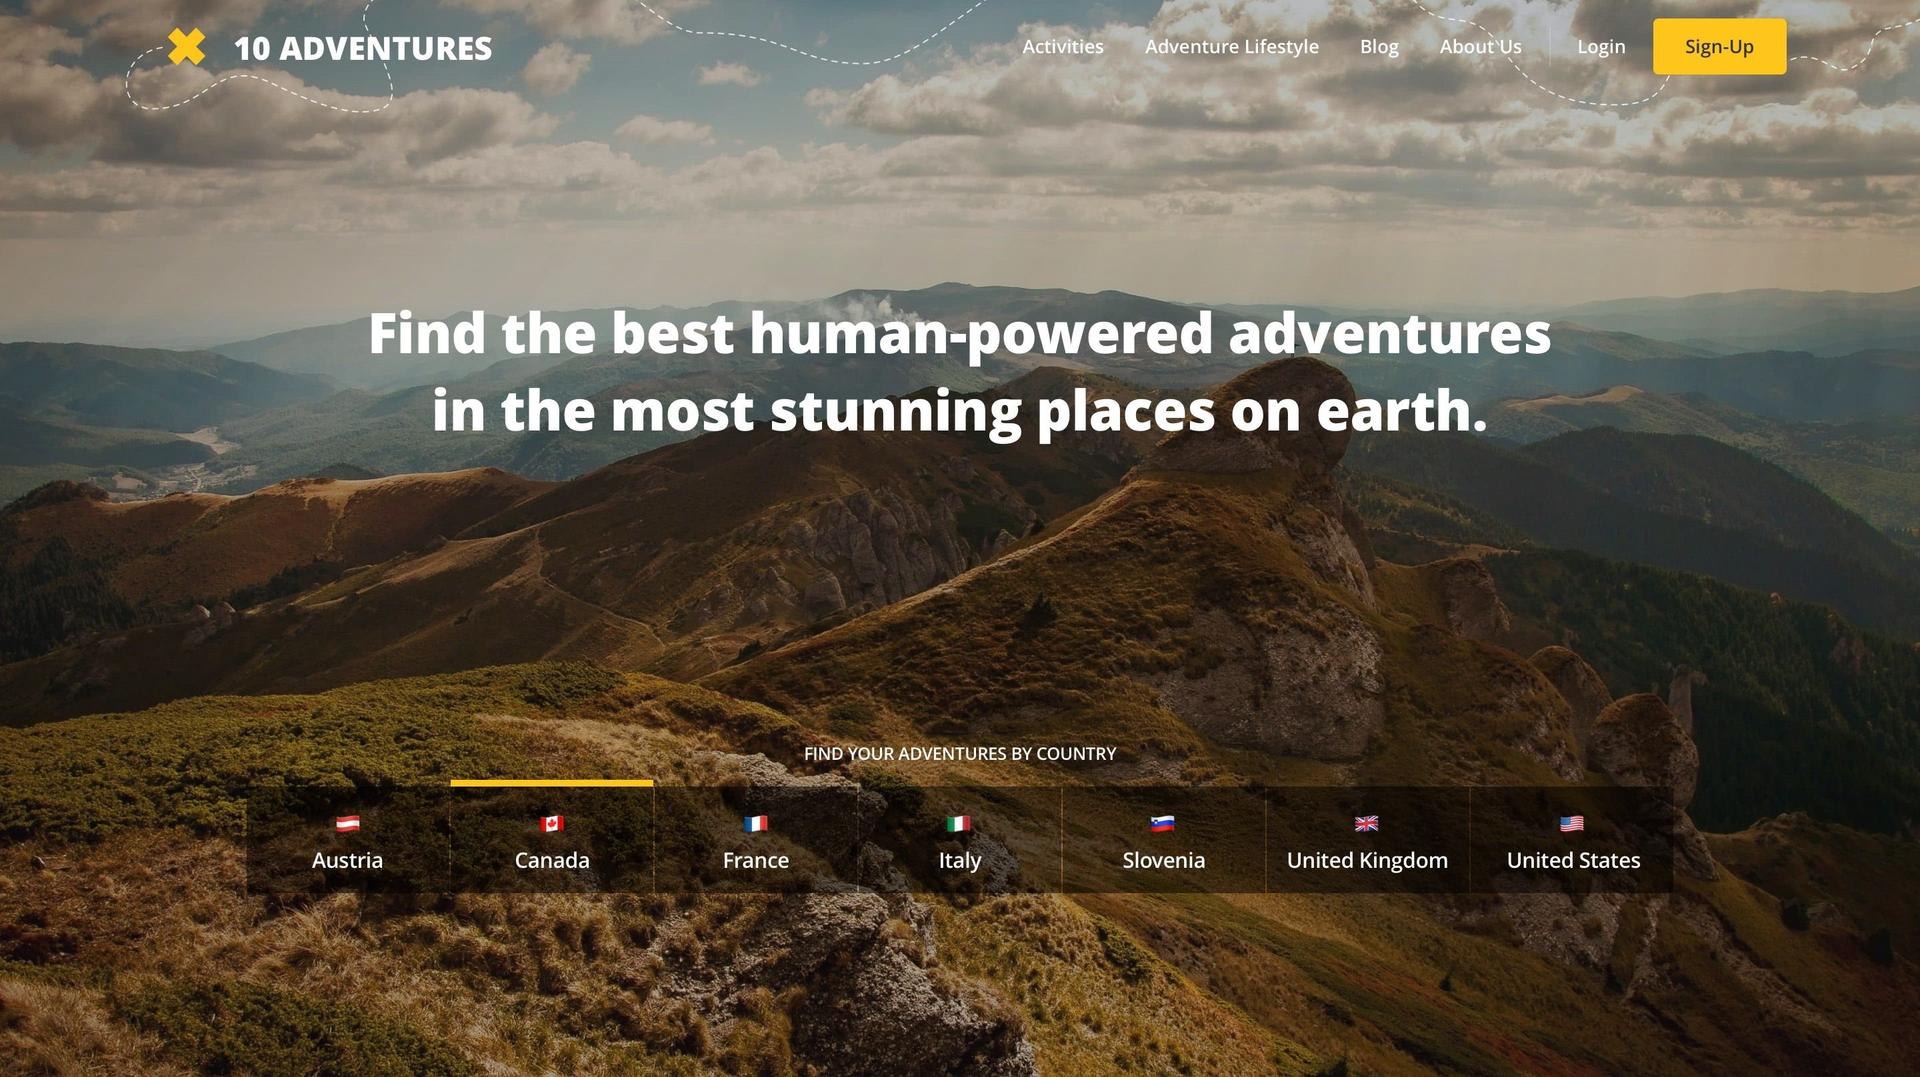 10 adventures home page